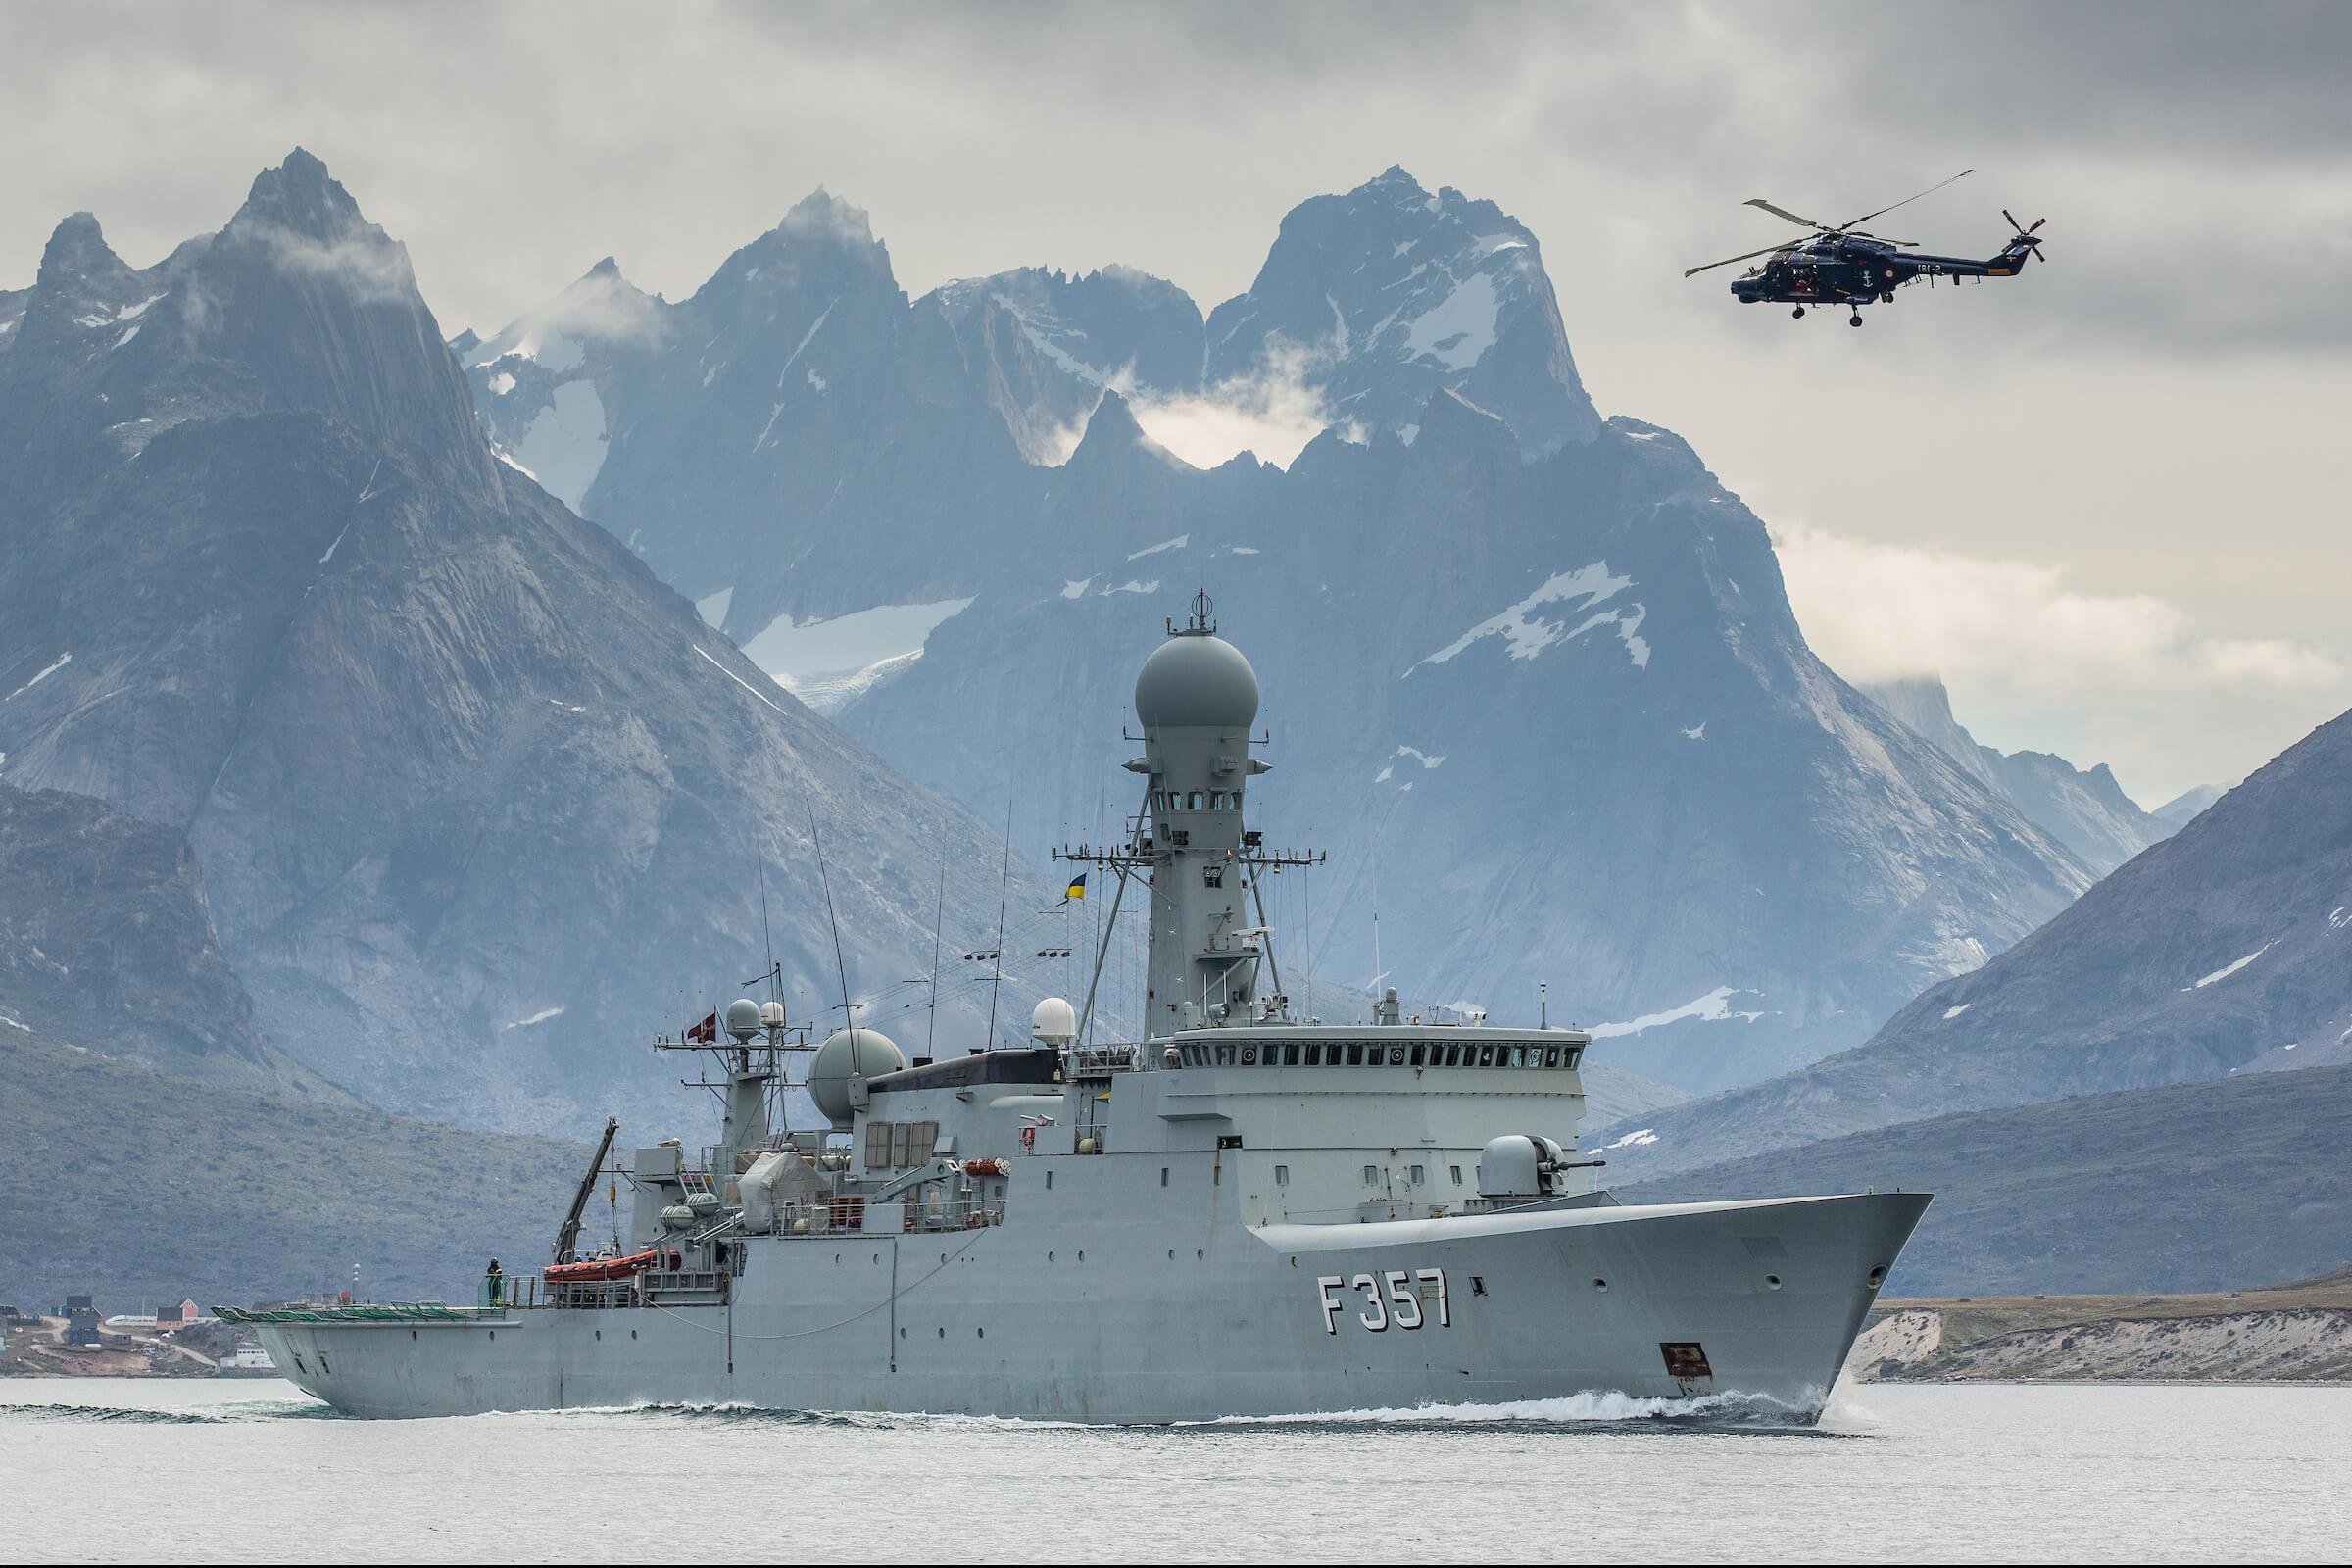 HDMS Thetis and a lynx helicopter from the Danish navy in the Tasermiut fjord in South Greenland. Photo by Mads Pihl - Visit Greenland